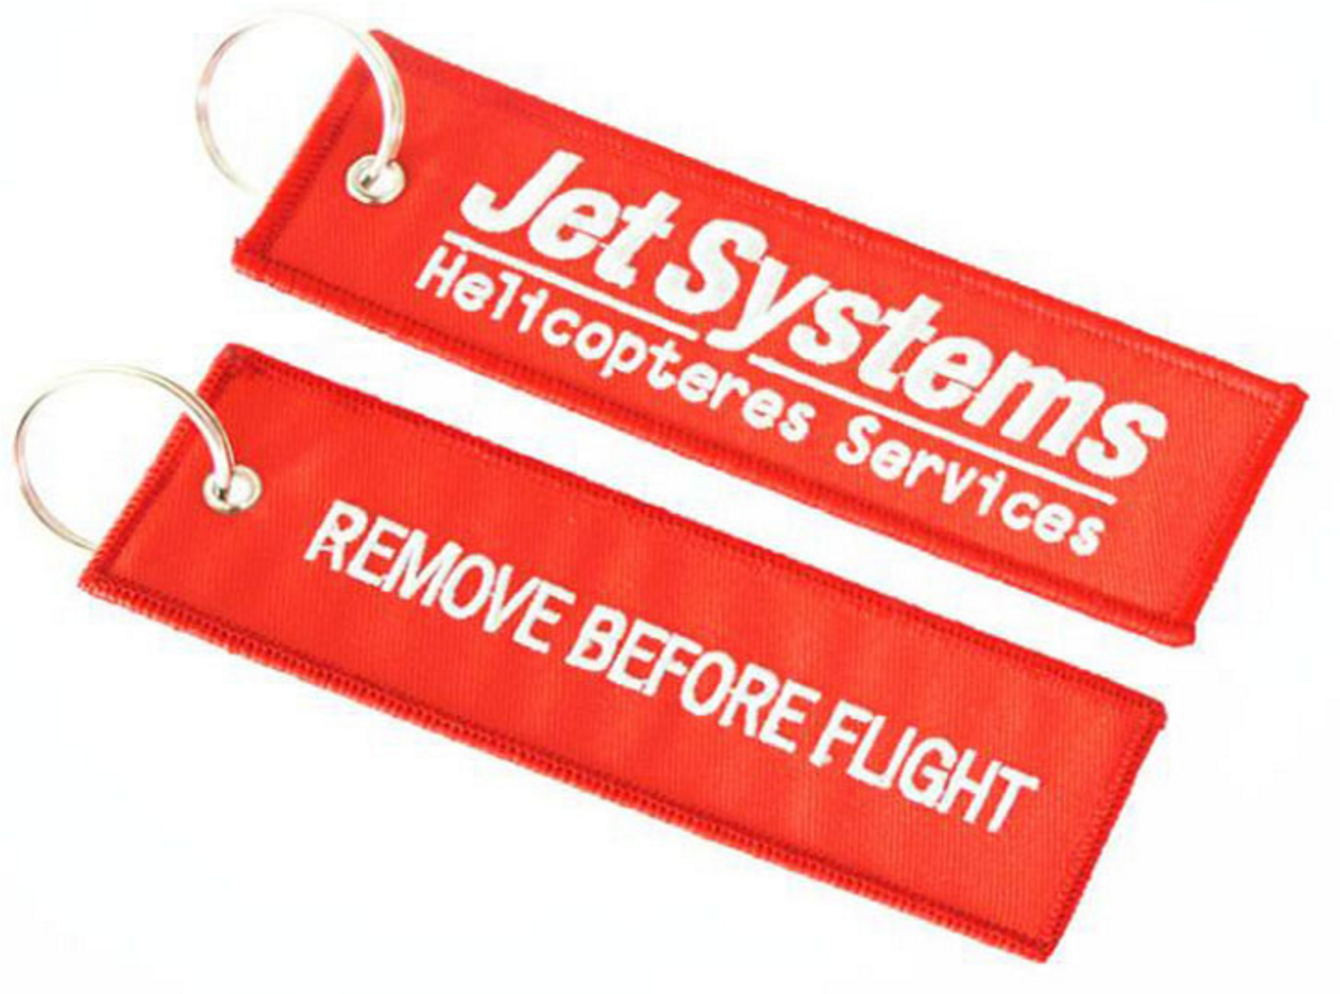 Remove Before Flight keychains Promotions